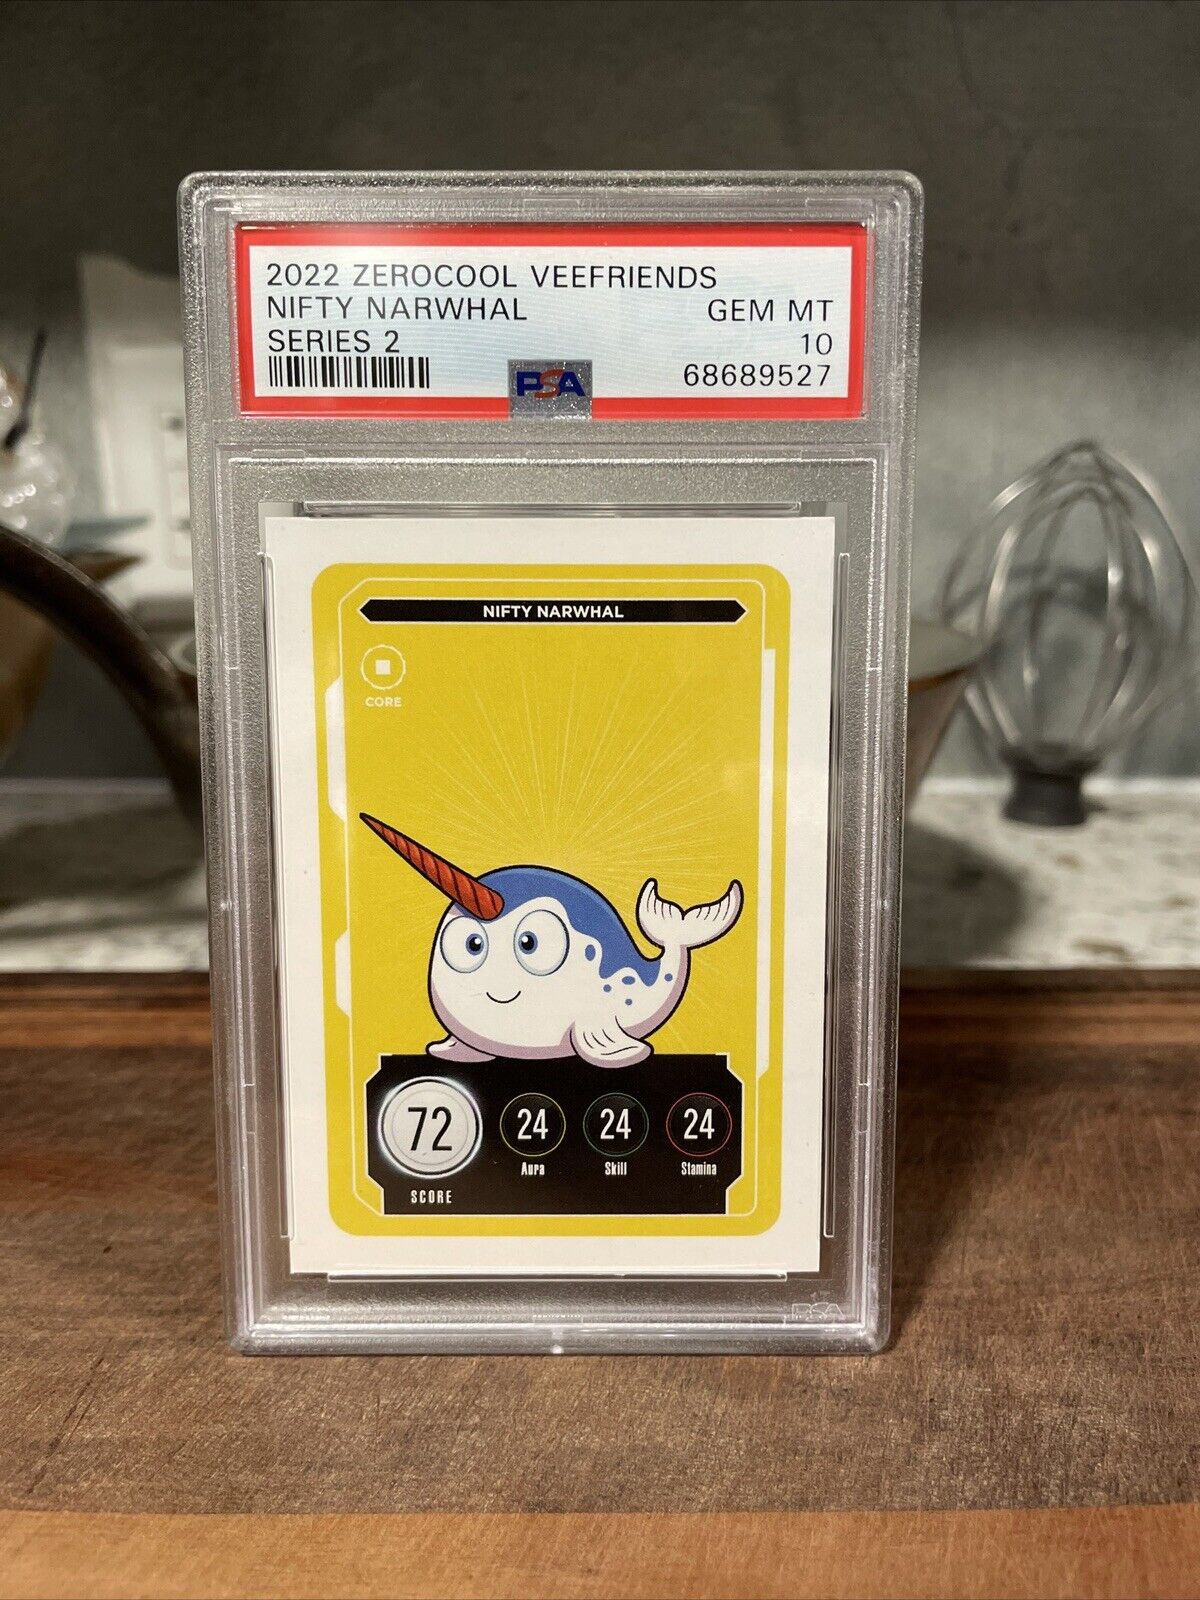 Nifty Narwhal Veefriends Compete And Collect Series 2 Core Card Gary Vee. PSA 10